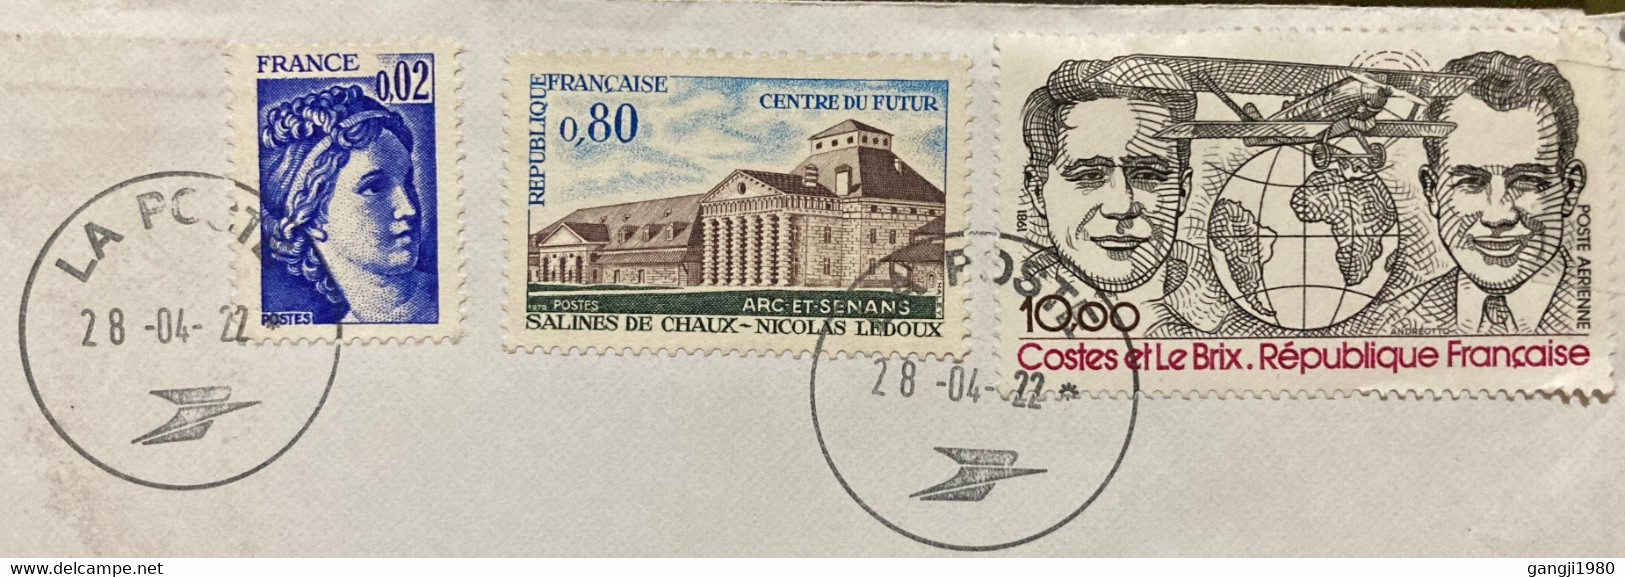 FRANCE 2022, QUEEN,AEROPLANE,GLOBE,BUILDING,ARCHITECTURE,3 STAMPS USED COVER TO INDIA - Lettres & Documents